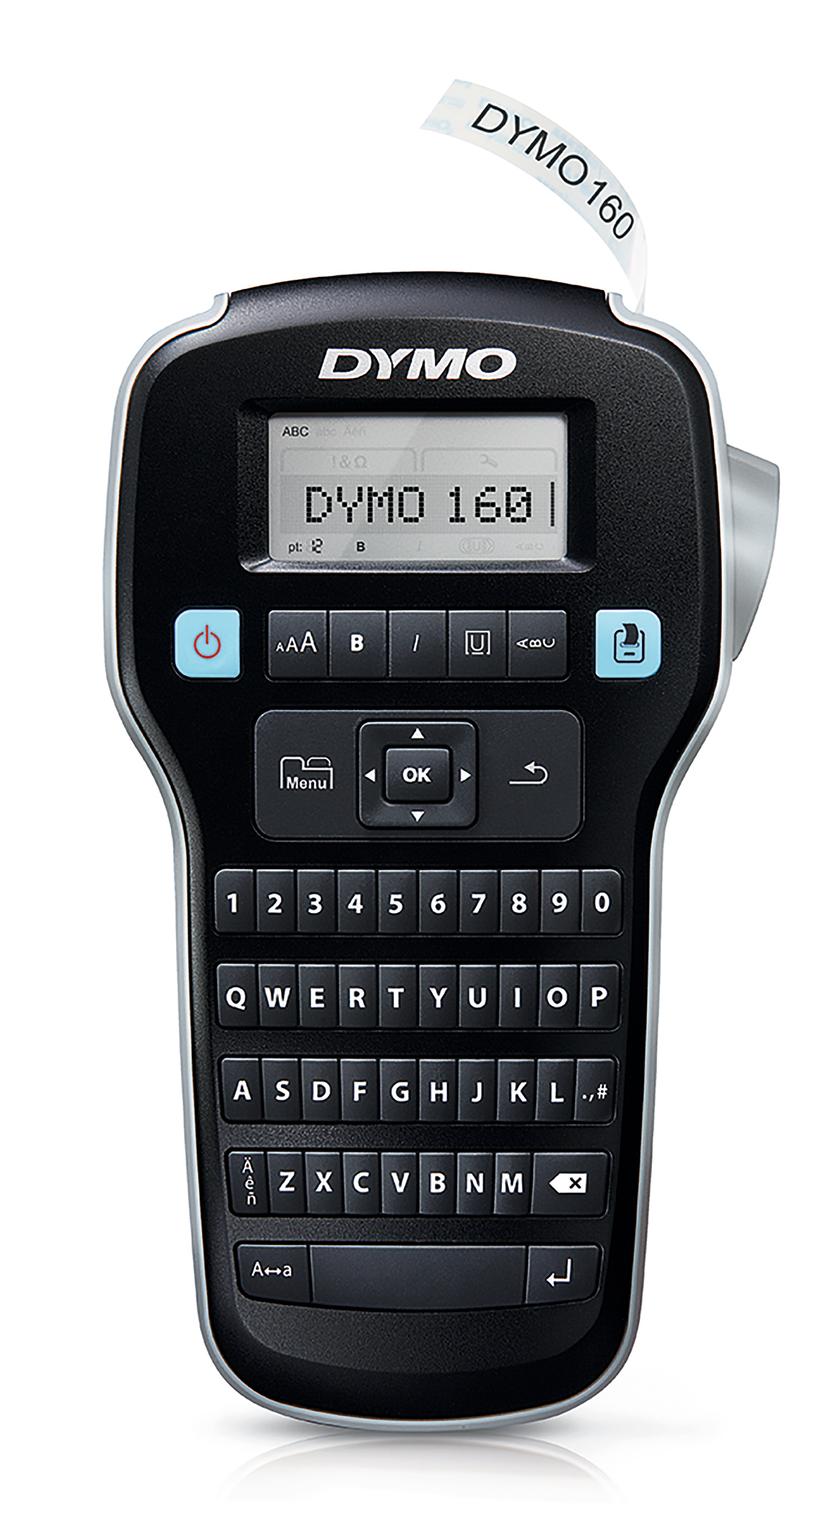 Dymo LabelMANAGER 160 Musta